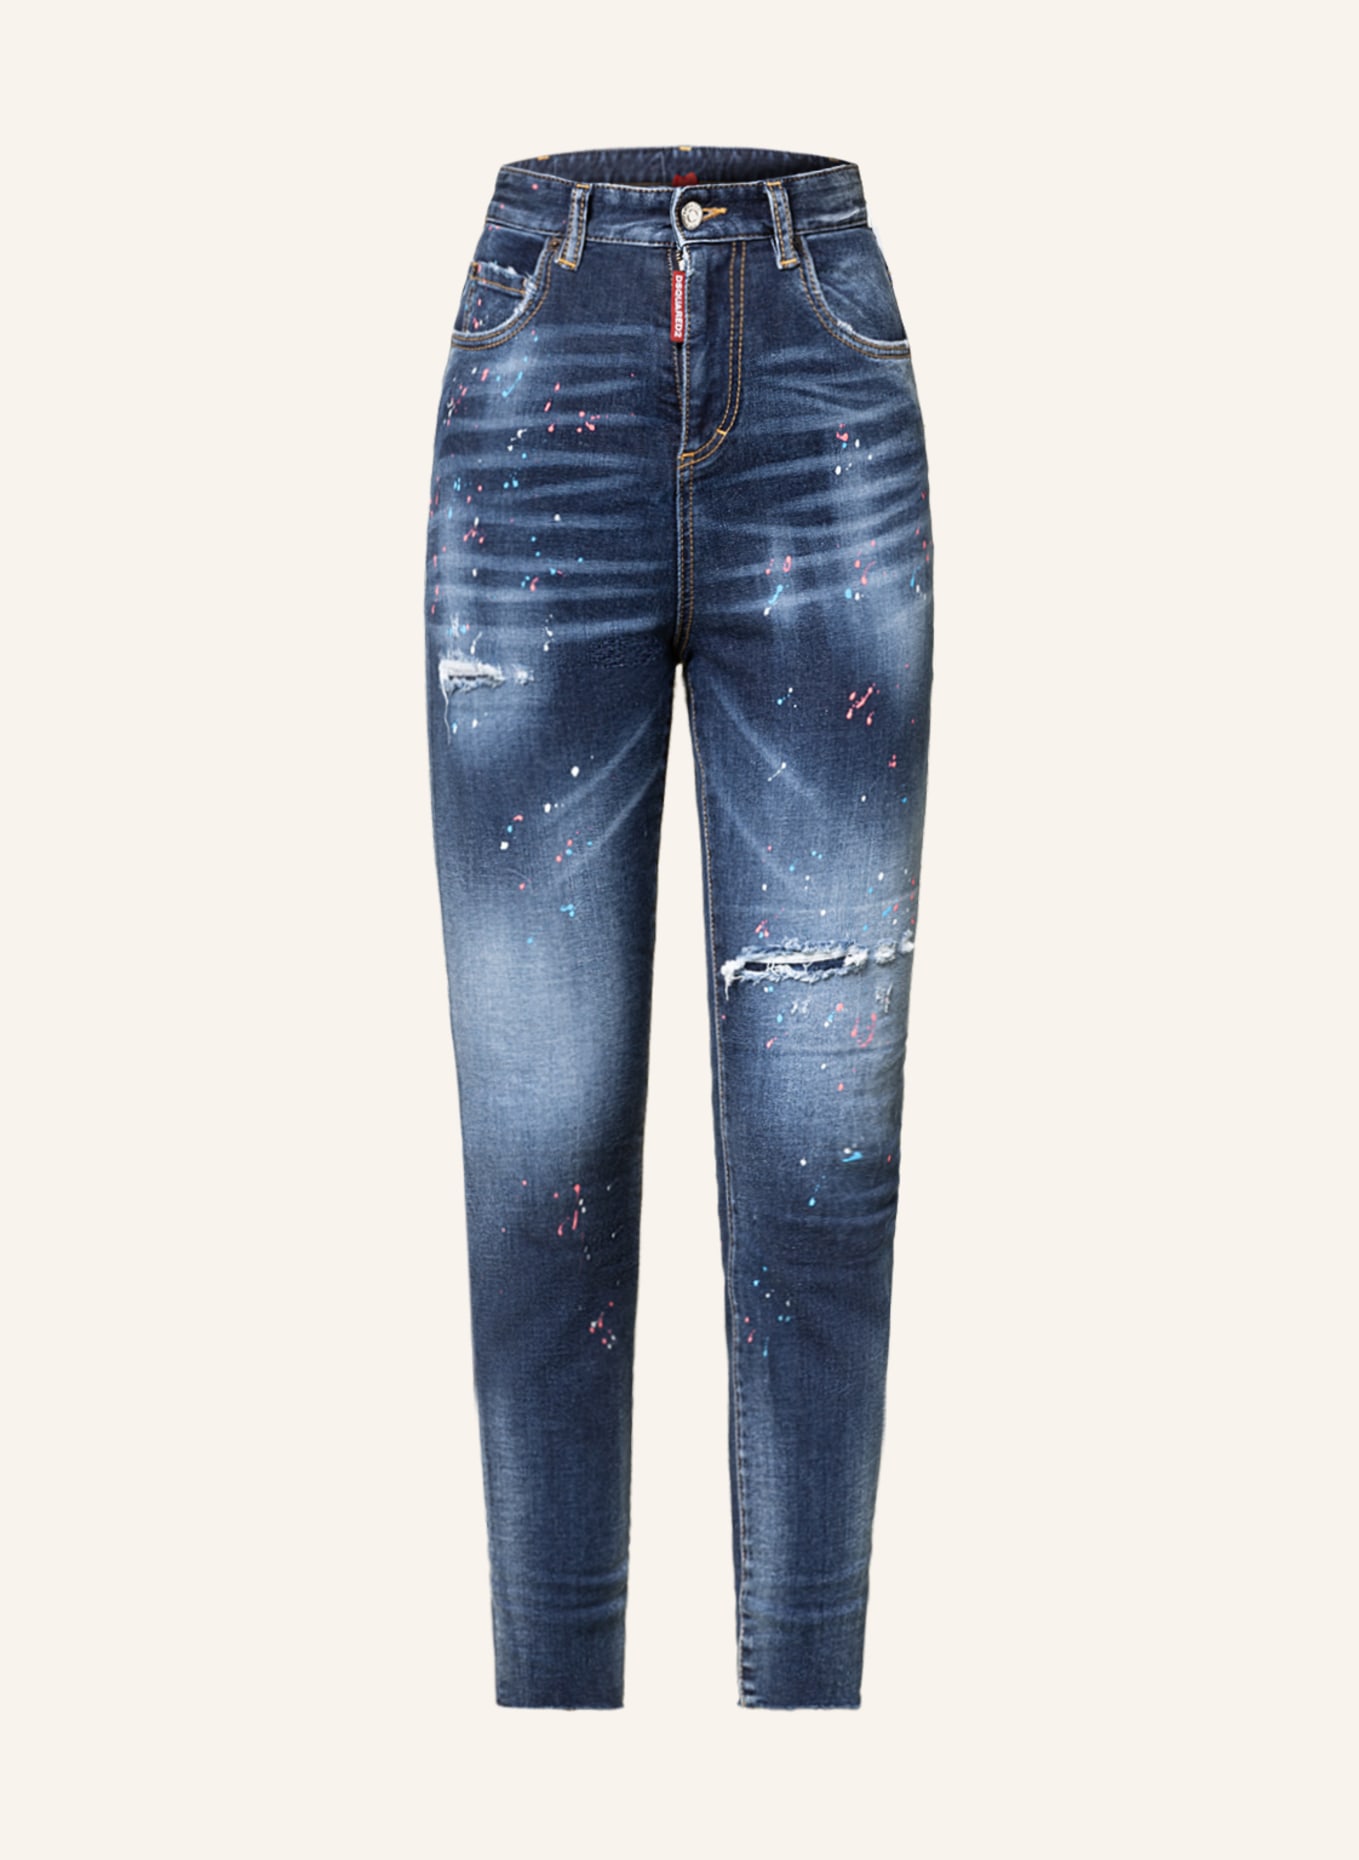 DSQUARED2 Destroyed Jeans TWIGGY, Farbe: 470 NAVY BLUE (Bild 1)